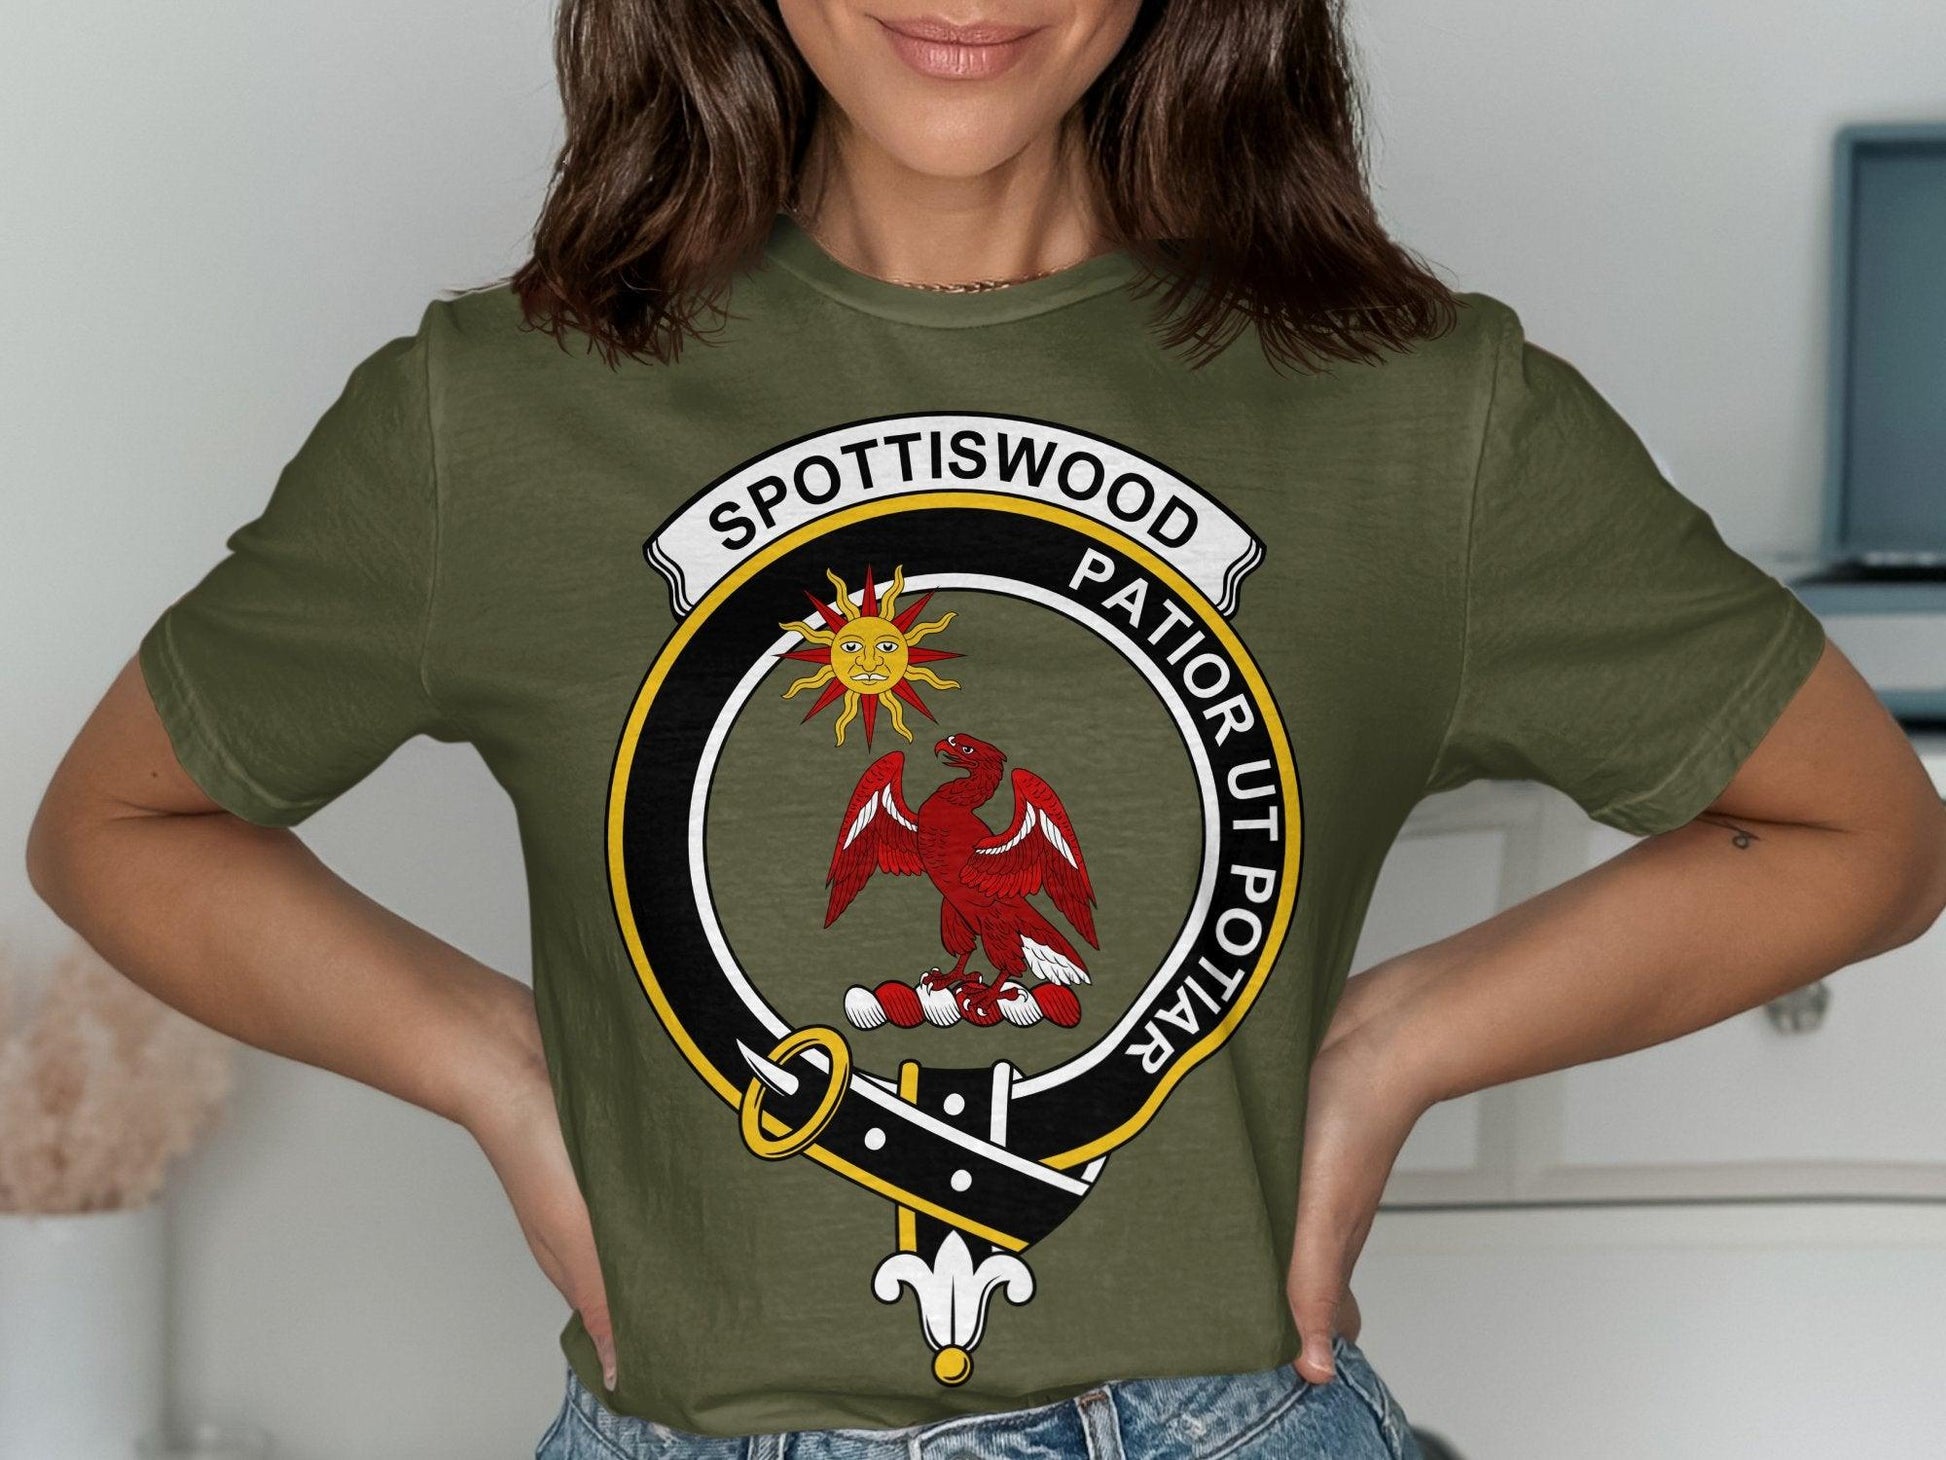 Unique Spottiswood Clan Crest Design on T-Shirt - Living Stone Gifts